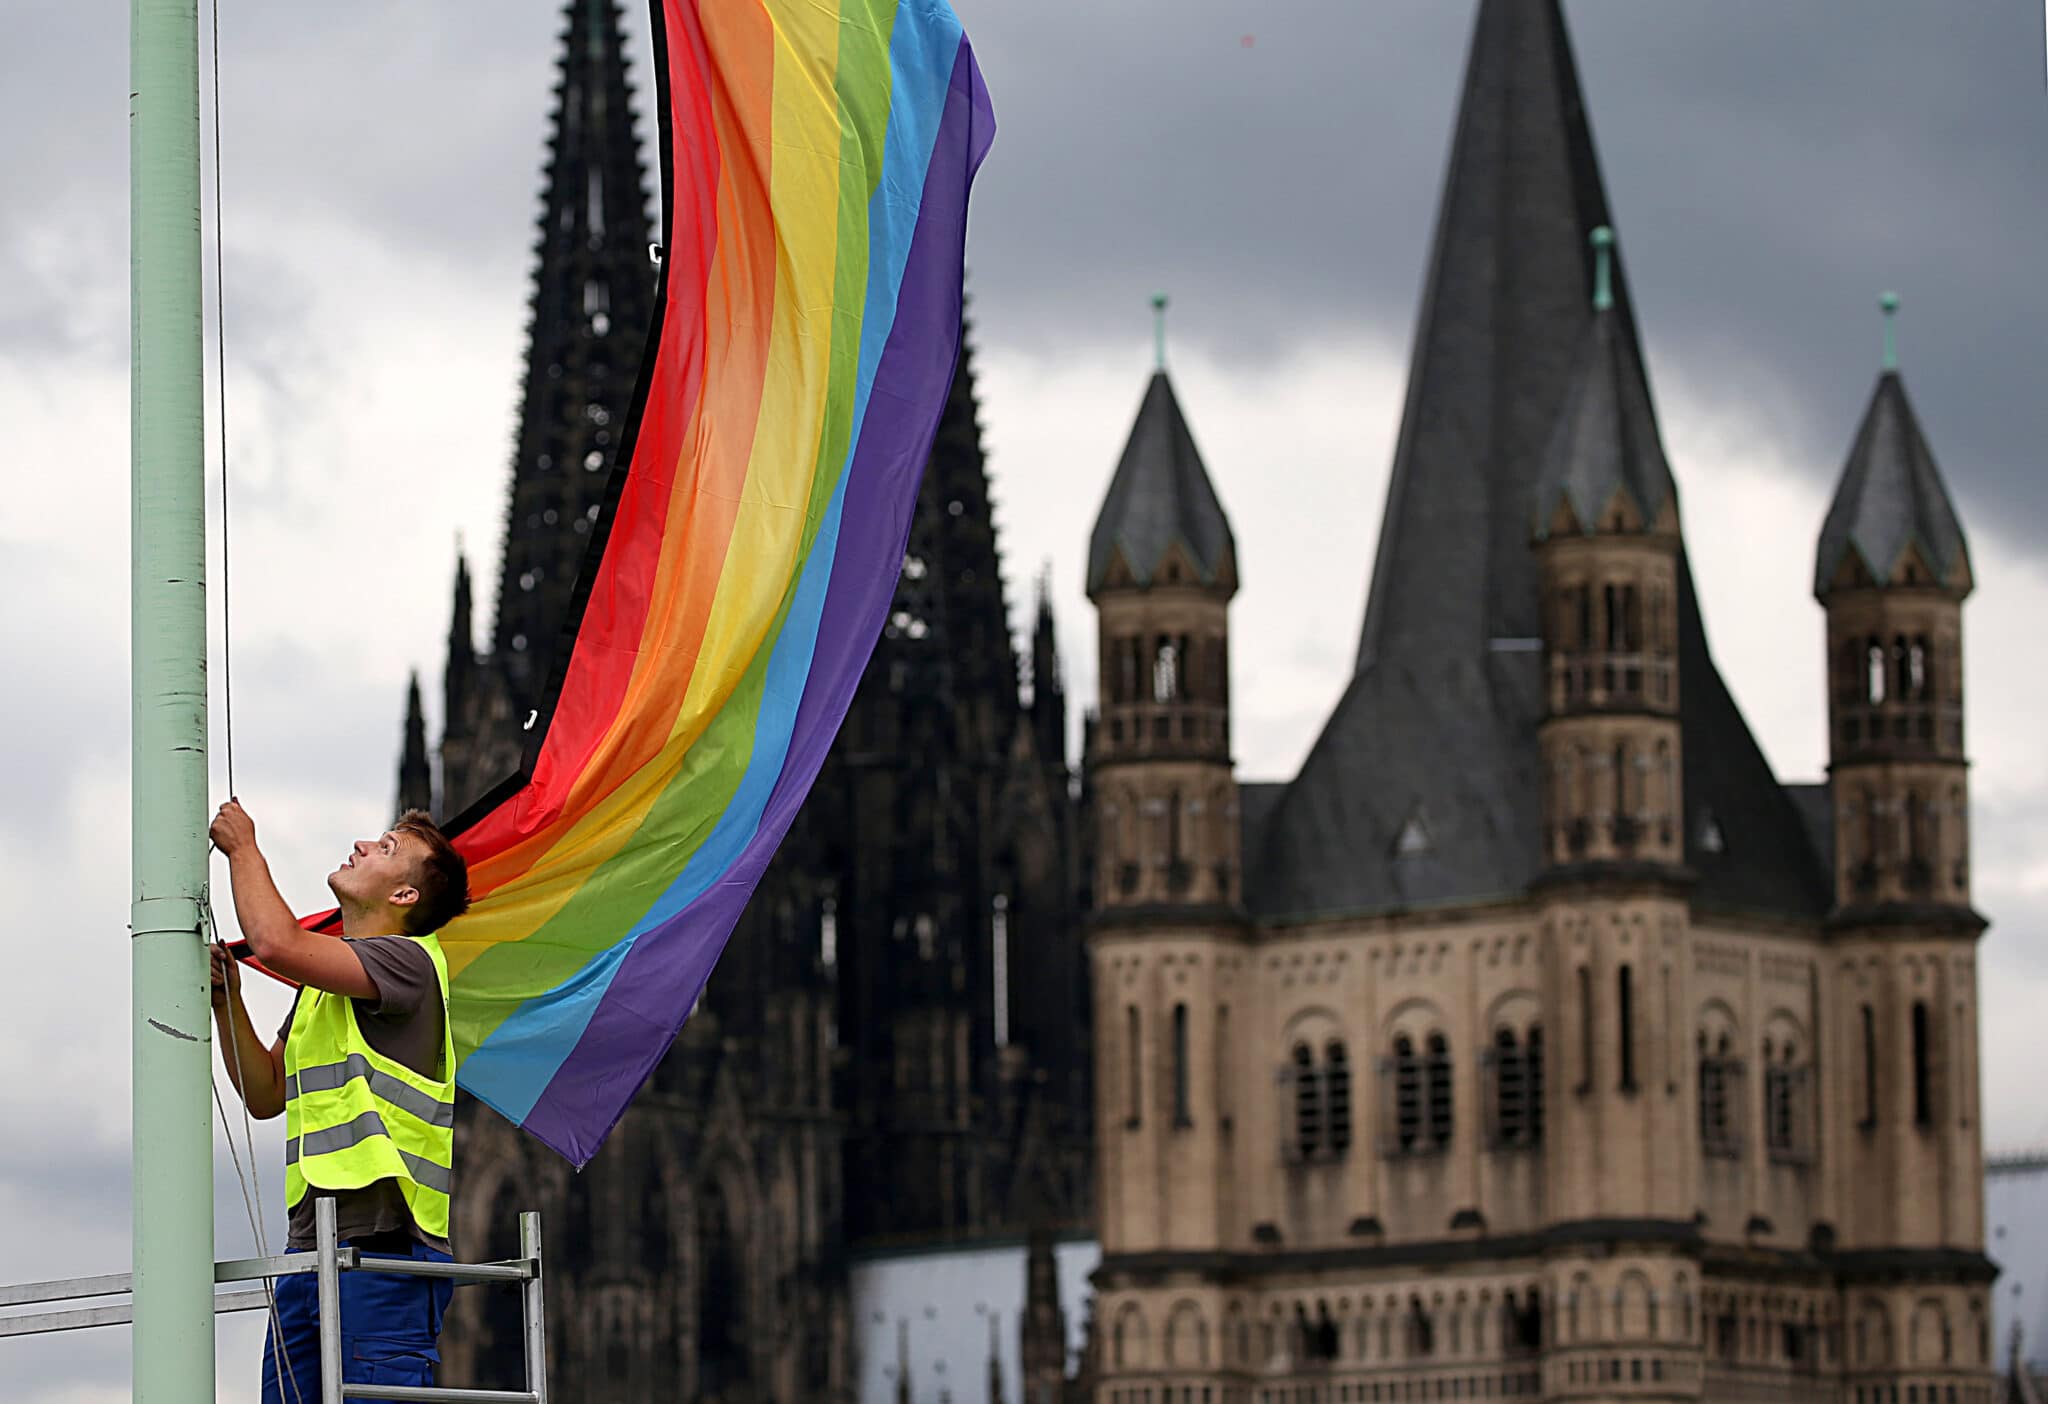 120 church officials come out as LGBT+ to protest Catholic homophobia